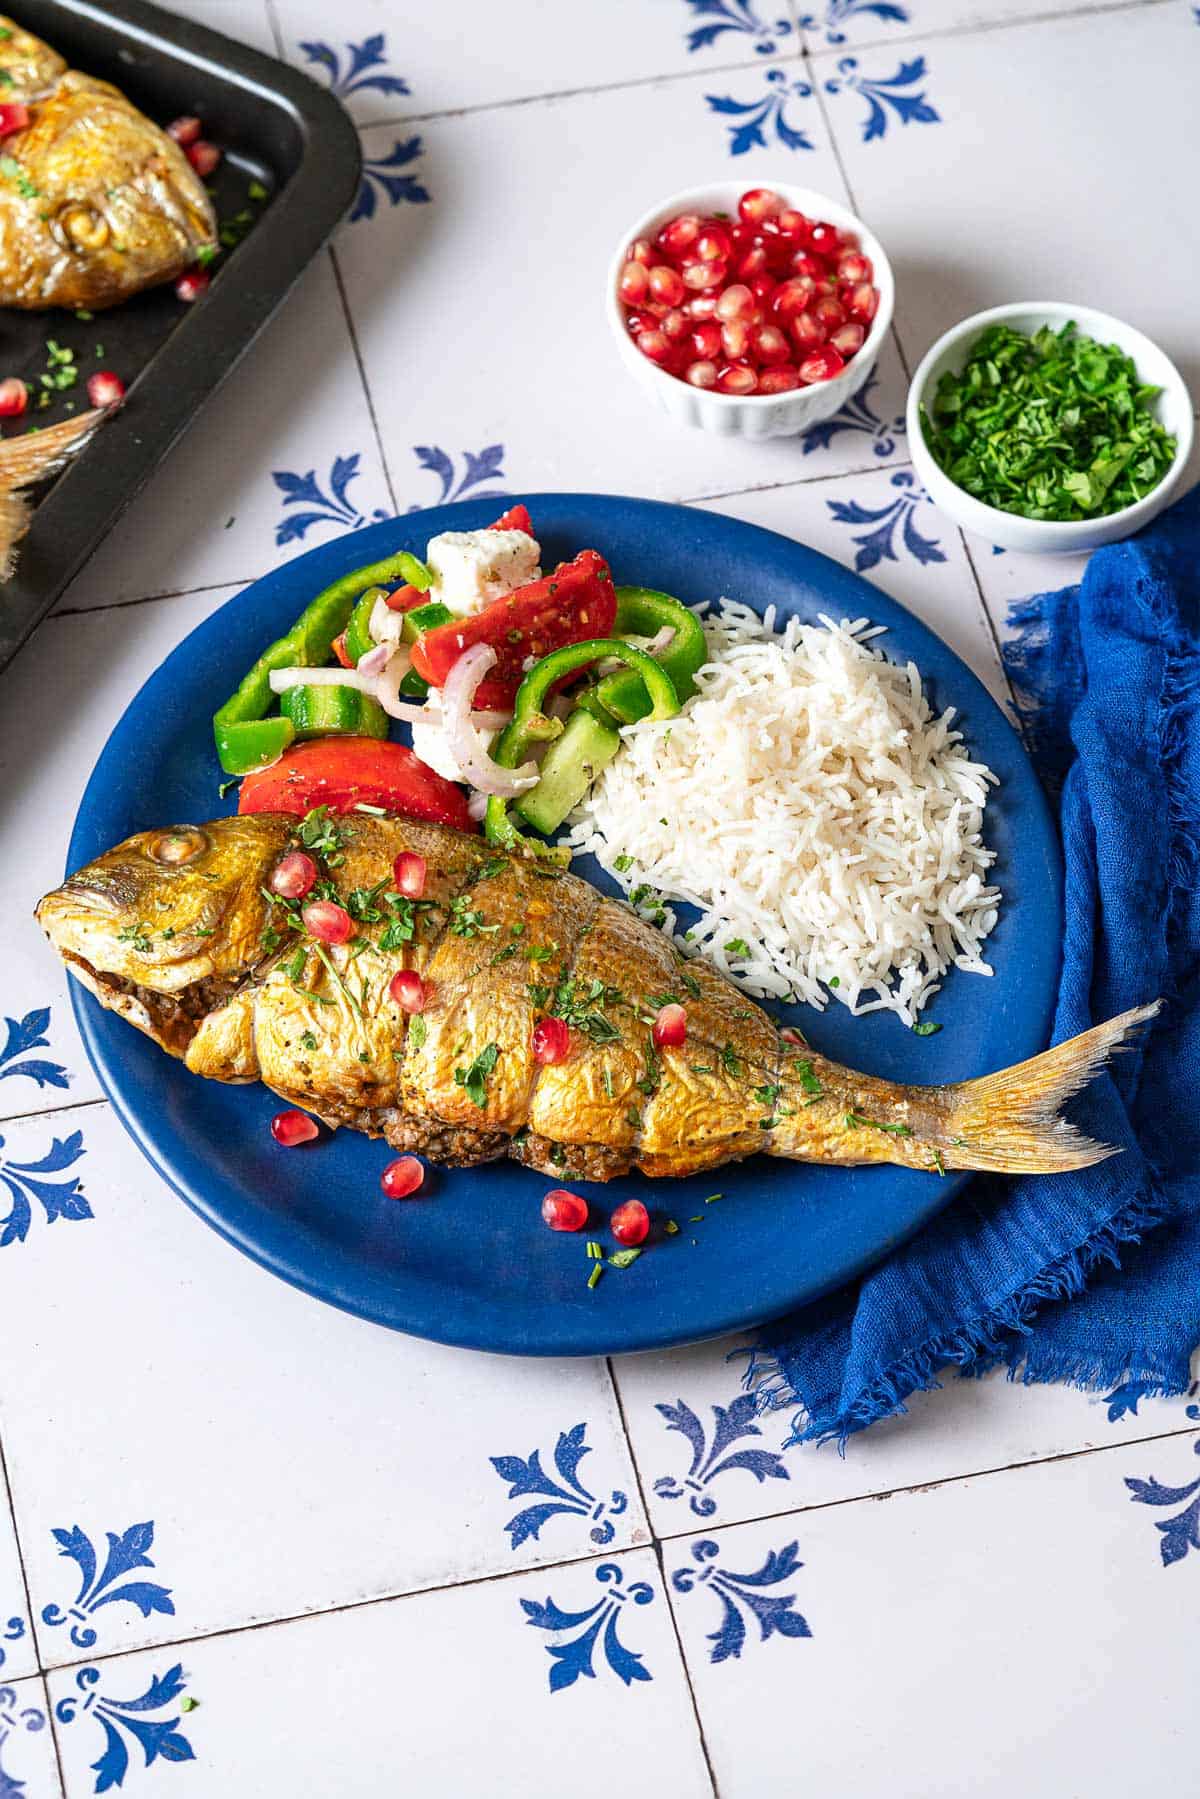 A serving of persian baked fish on a plate with rice and a salad next to small bowls of chopped parsley and pomegranate seeds and the baking sheet with the rest of the fish.